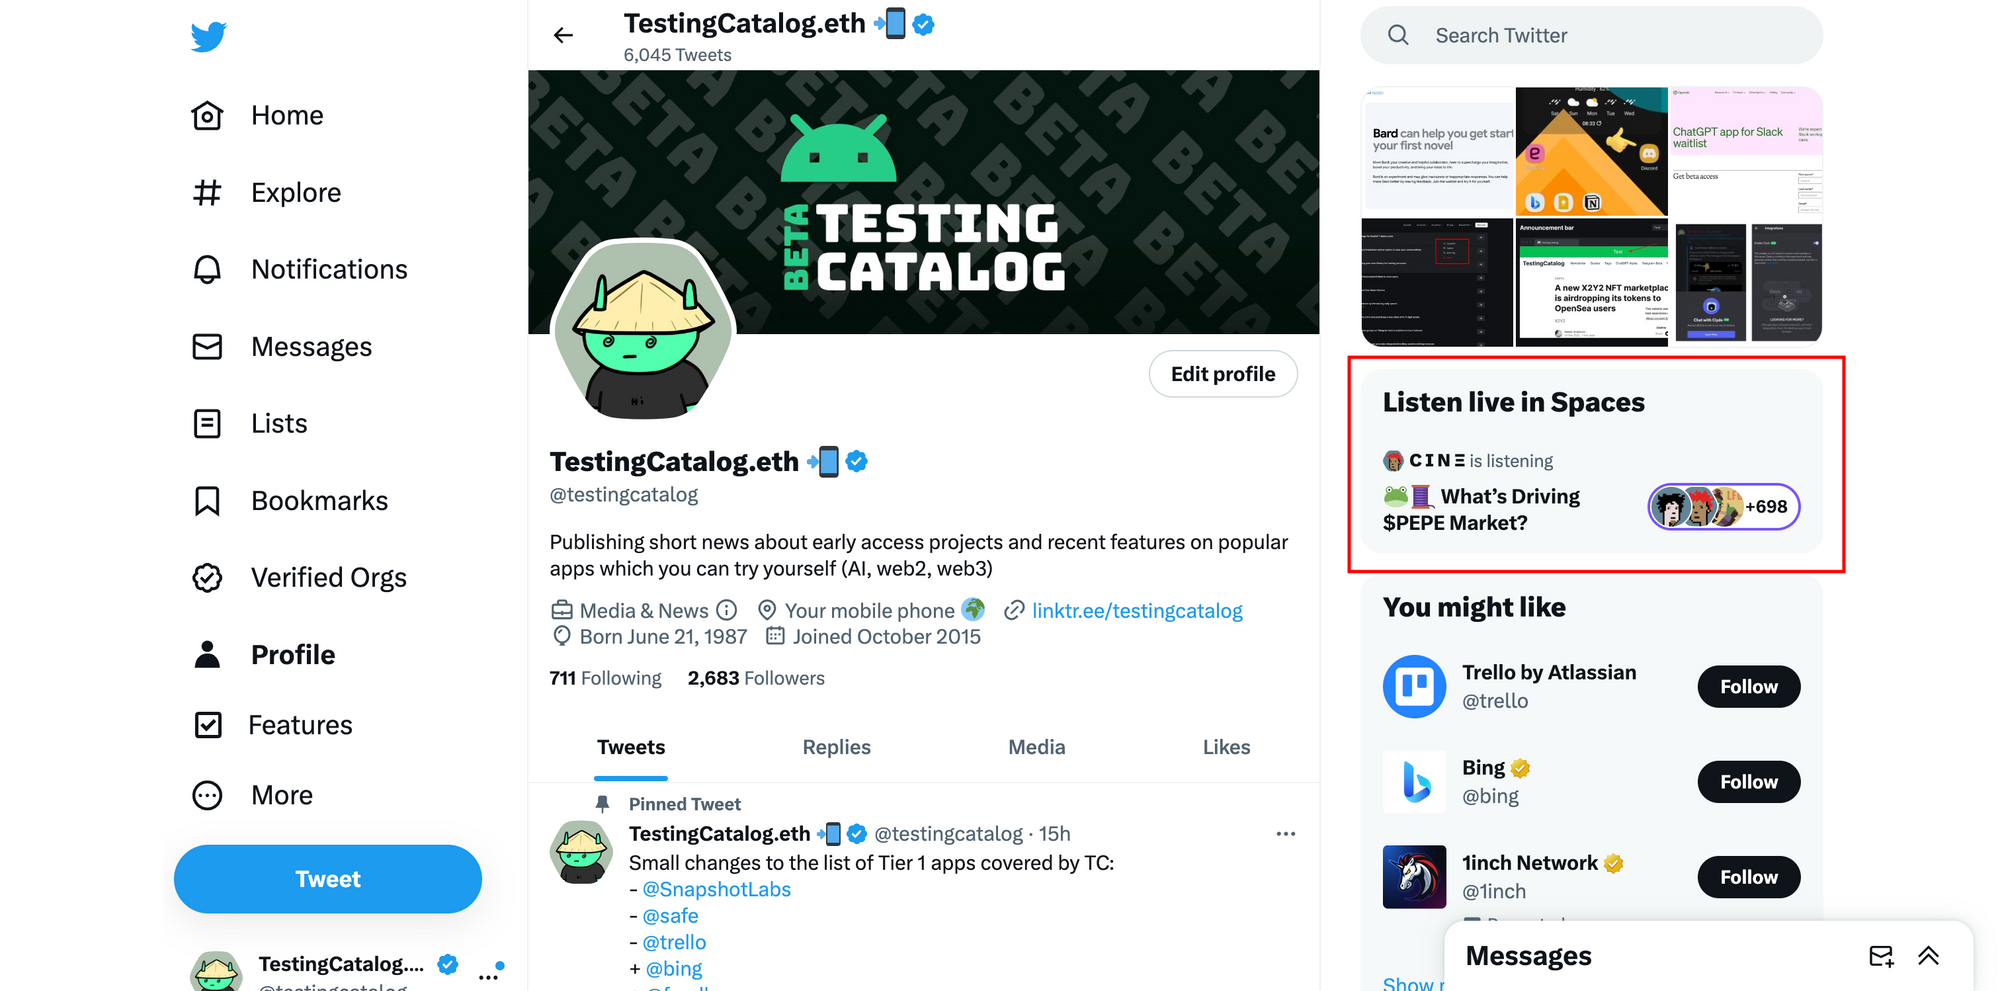 Twitter for Web introduces Live Spaces widget, Drafts link, and improved Lists access